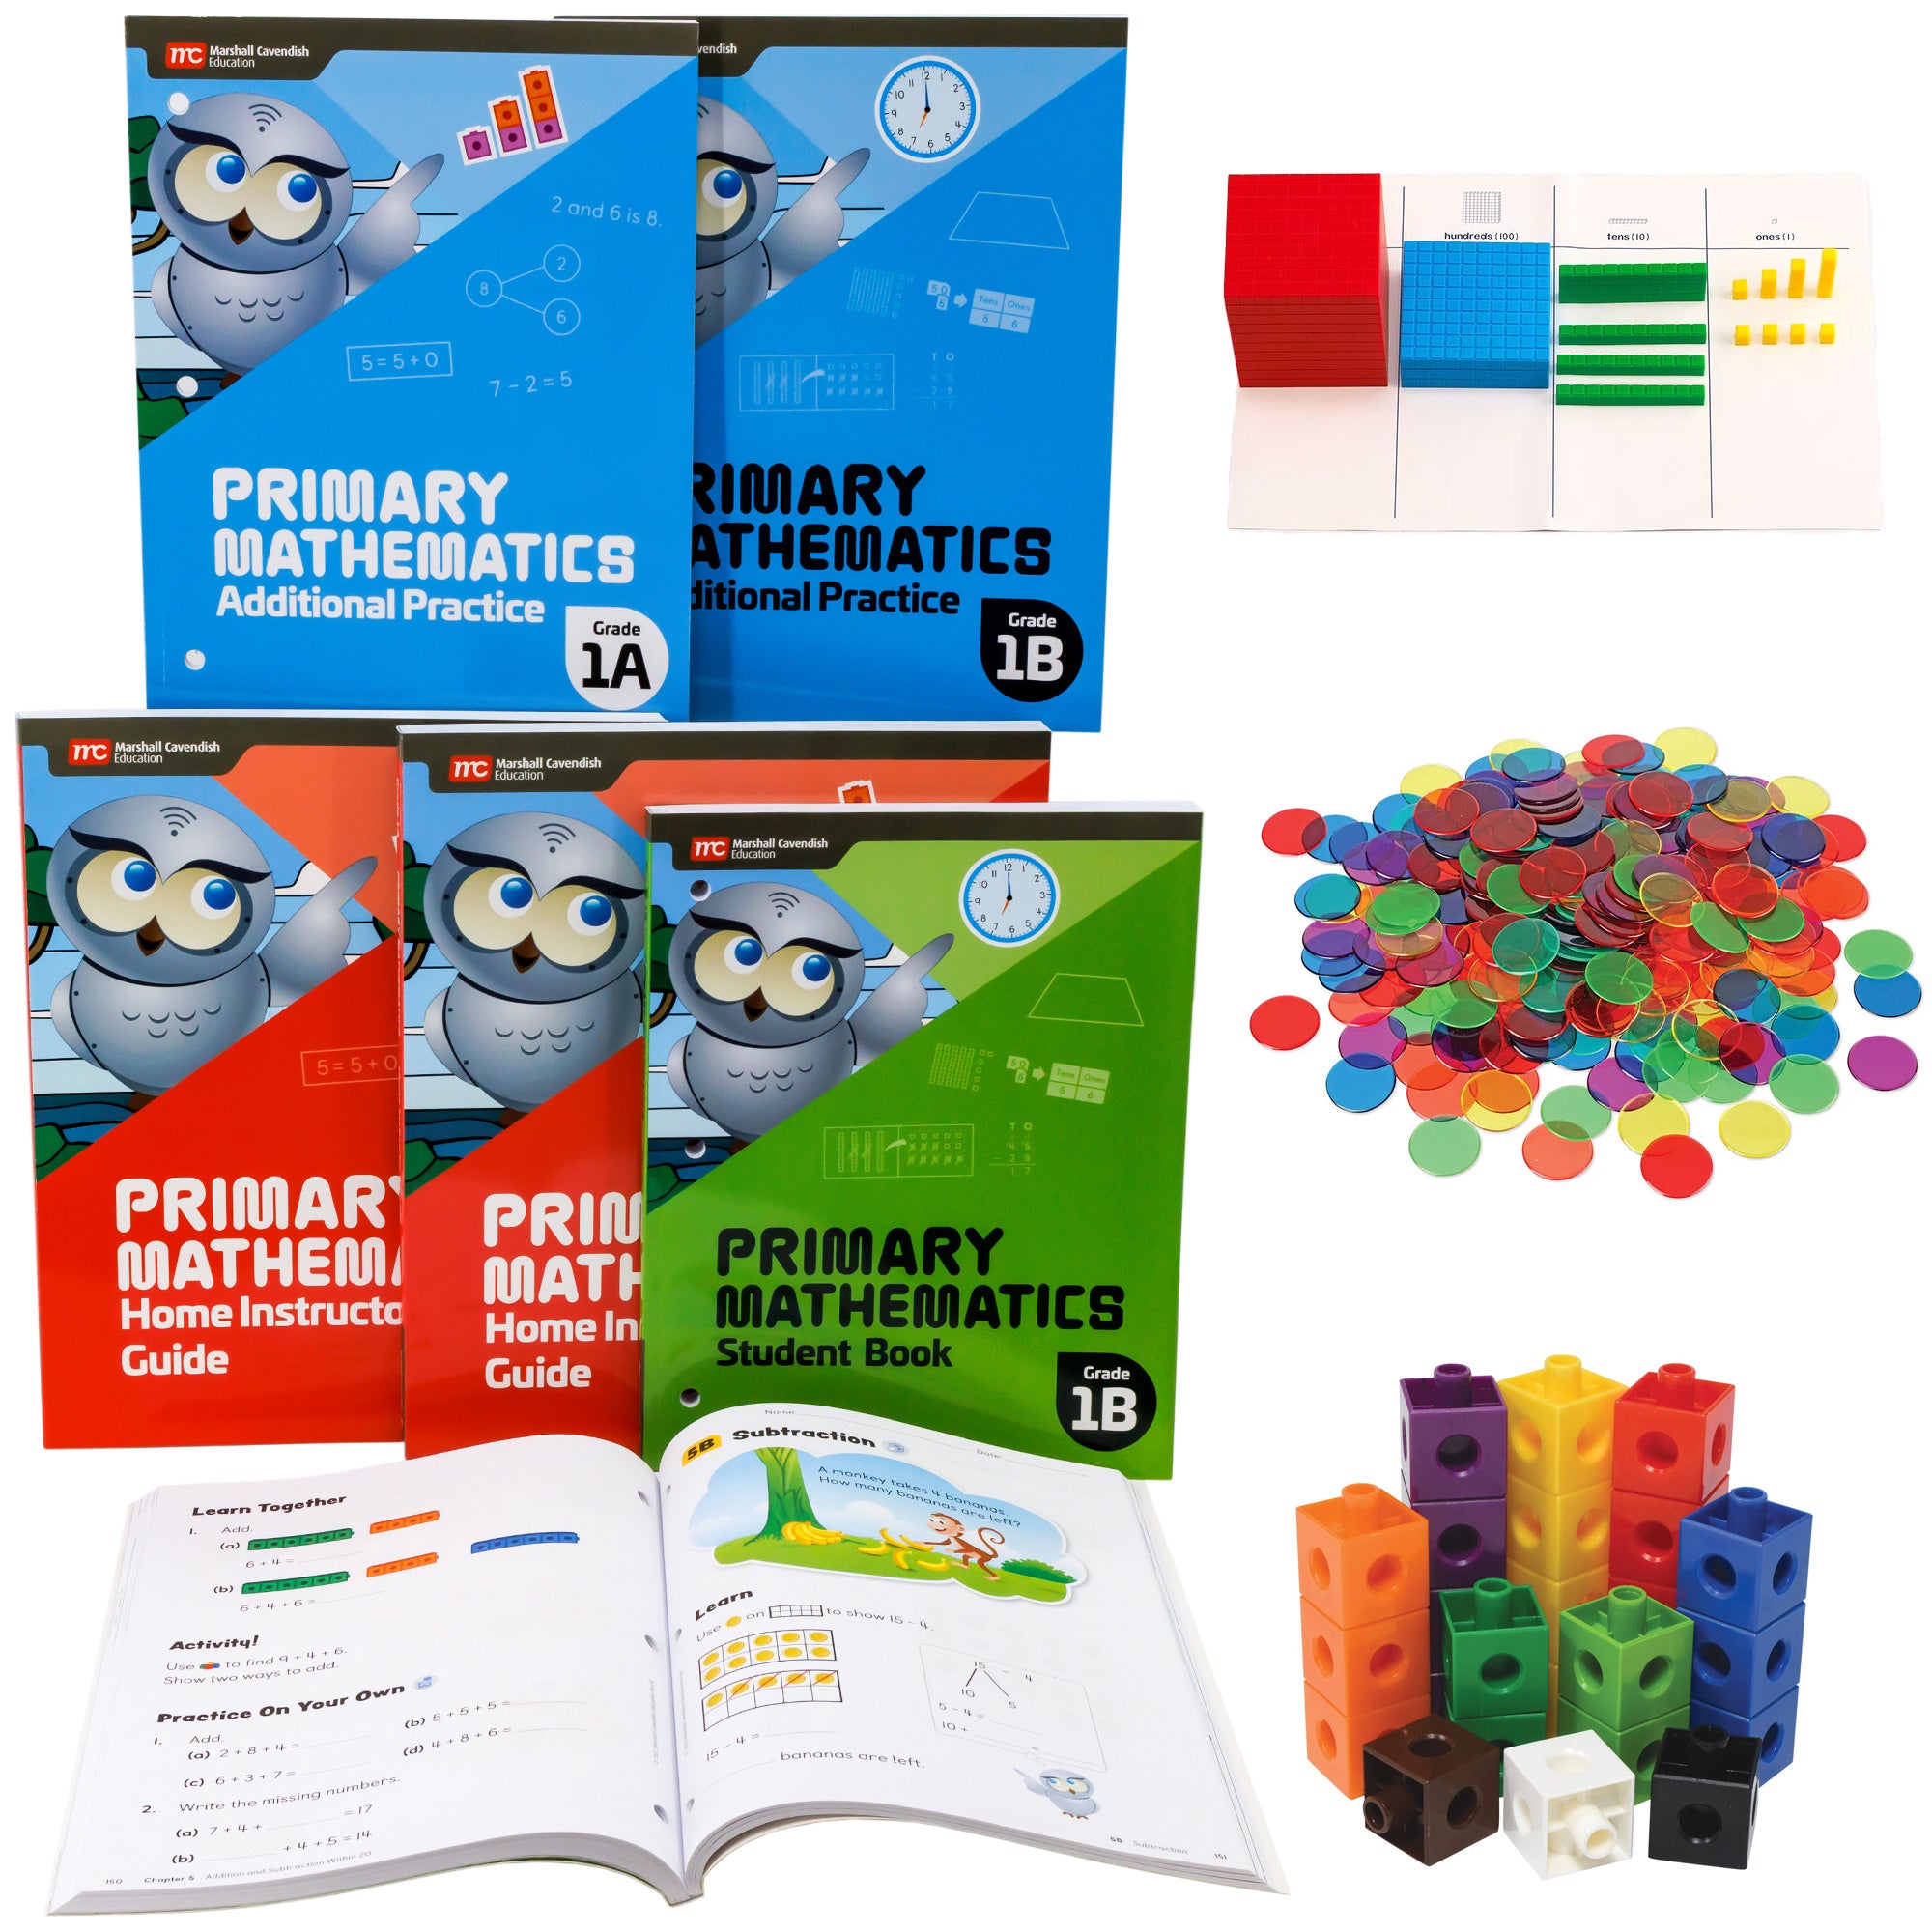 Singapore Primary Mathematics first grade Set. On the left are 6 books with an owl on each cover. Top row shows 2 blue books. Middle row shows 3 books; 2 red and 1 green. On the bottom is one open book showing math problems with manipulatives on the left, and a monkey with bananas under a tree and math problems on the right. On the right are manipulatives in a variety of colors. Top shows blocks. Middle shows connected blocks with holes on the sides of each piece. Bottom shows transparent round tokens.